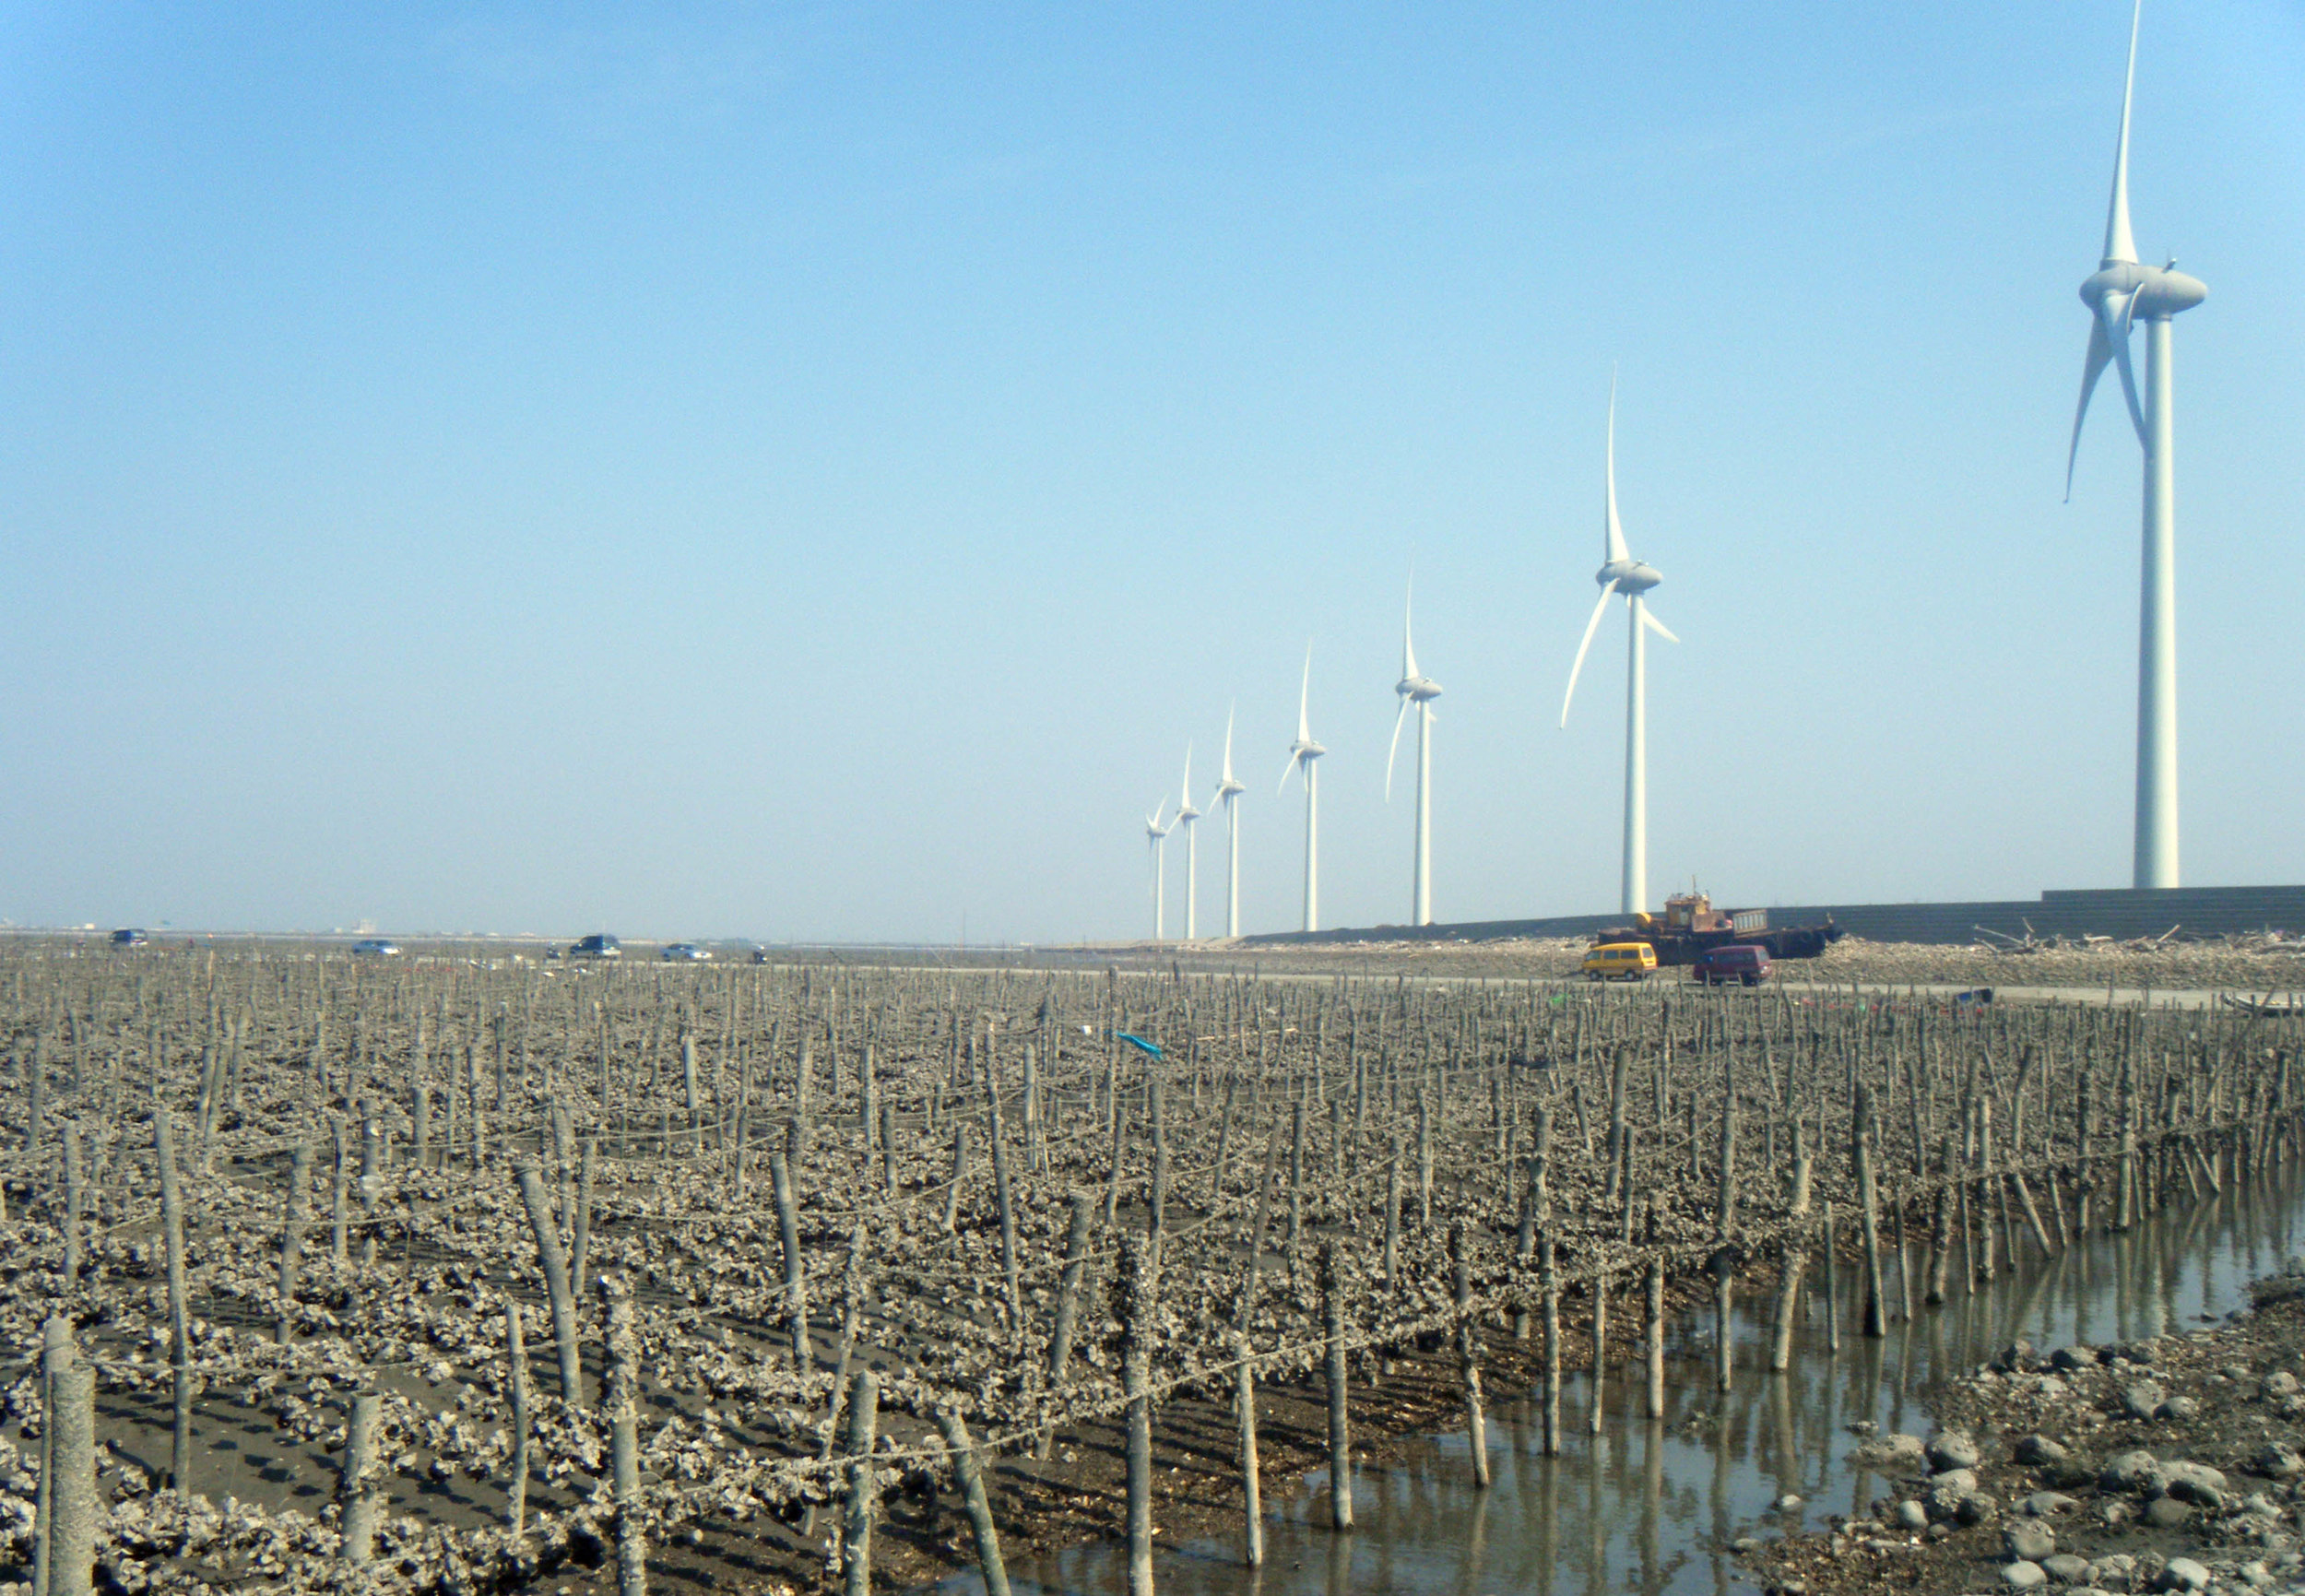 oyster culture and wind farm.jpg